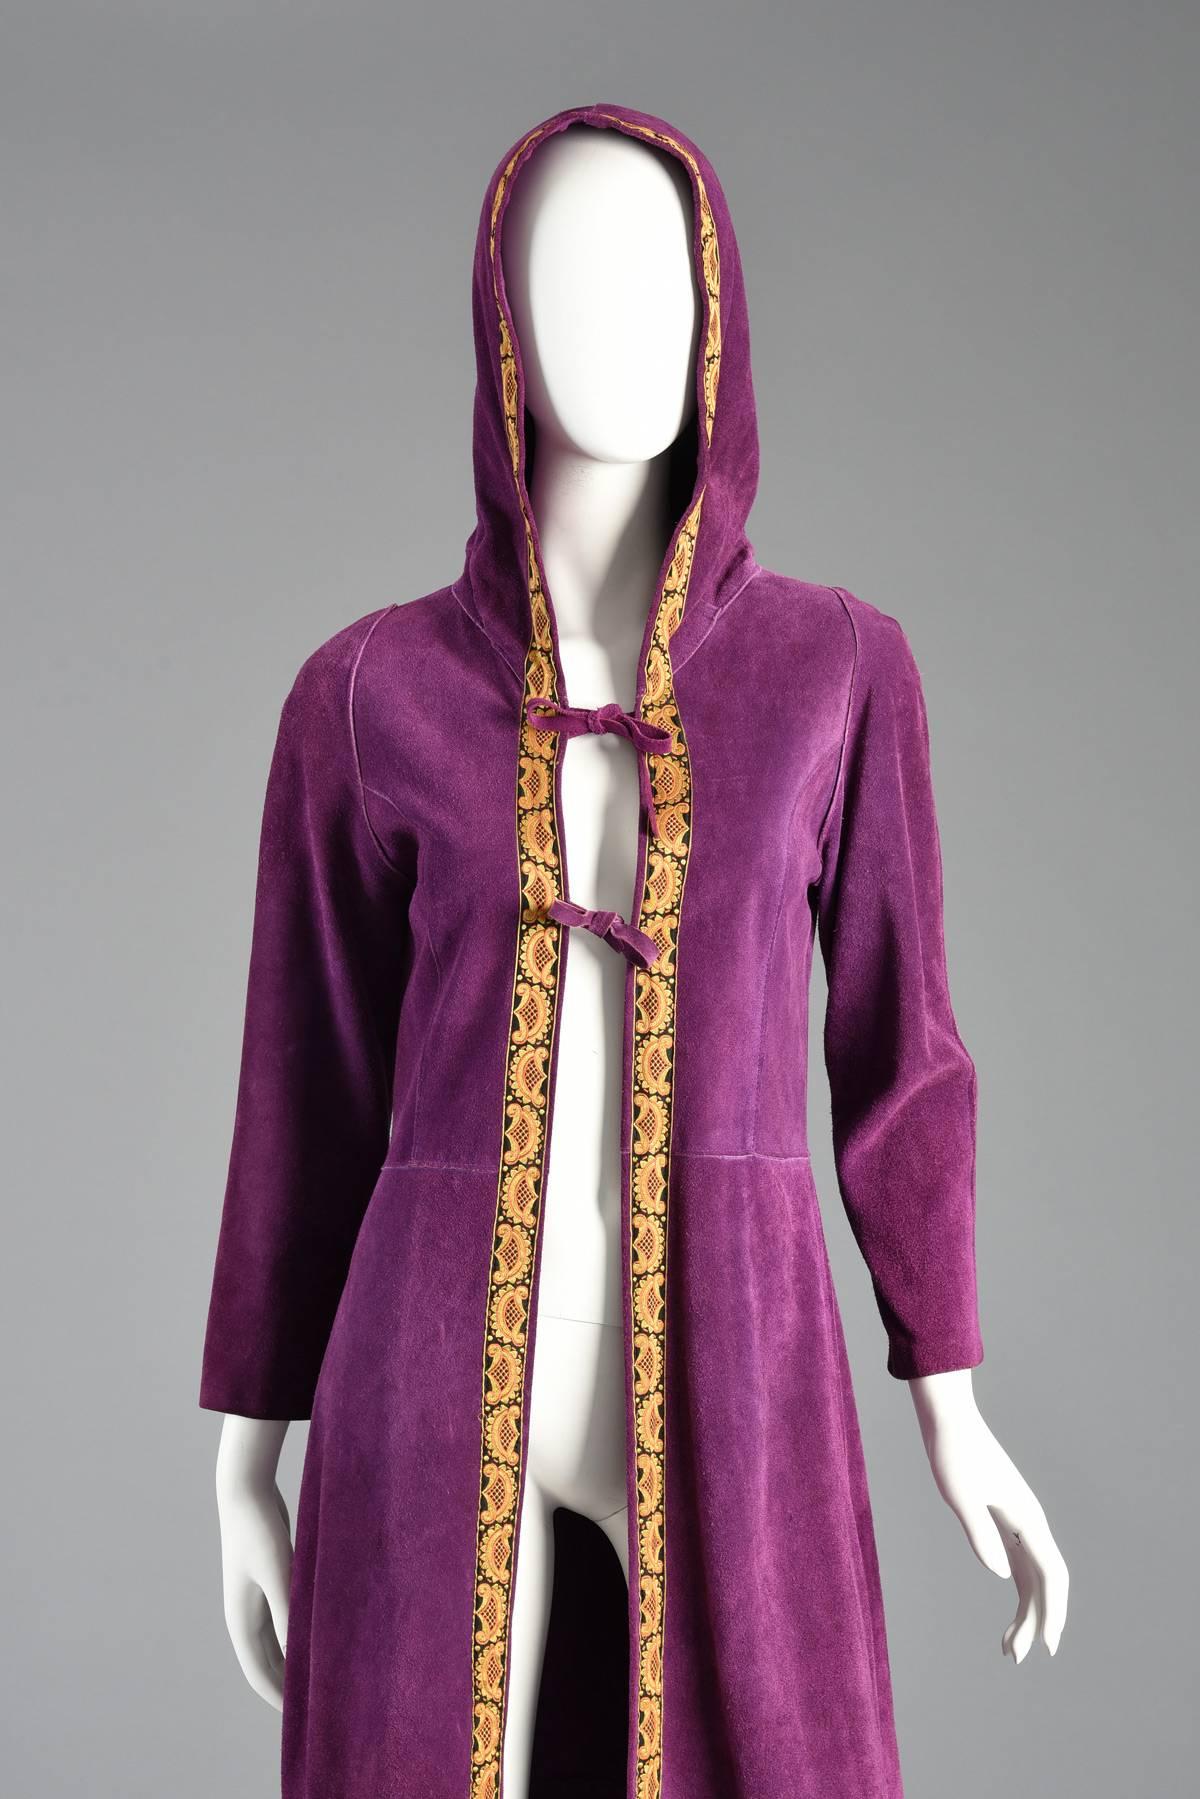 Women's 1960s Bohemian Purple Suede Hooded Jacket with Tapestry Trim For Sale